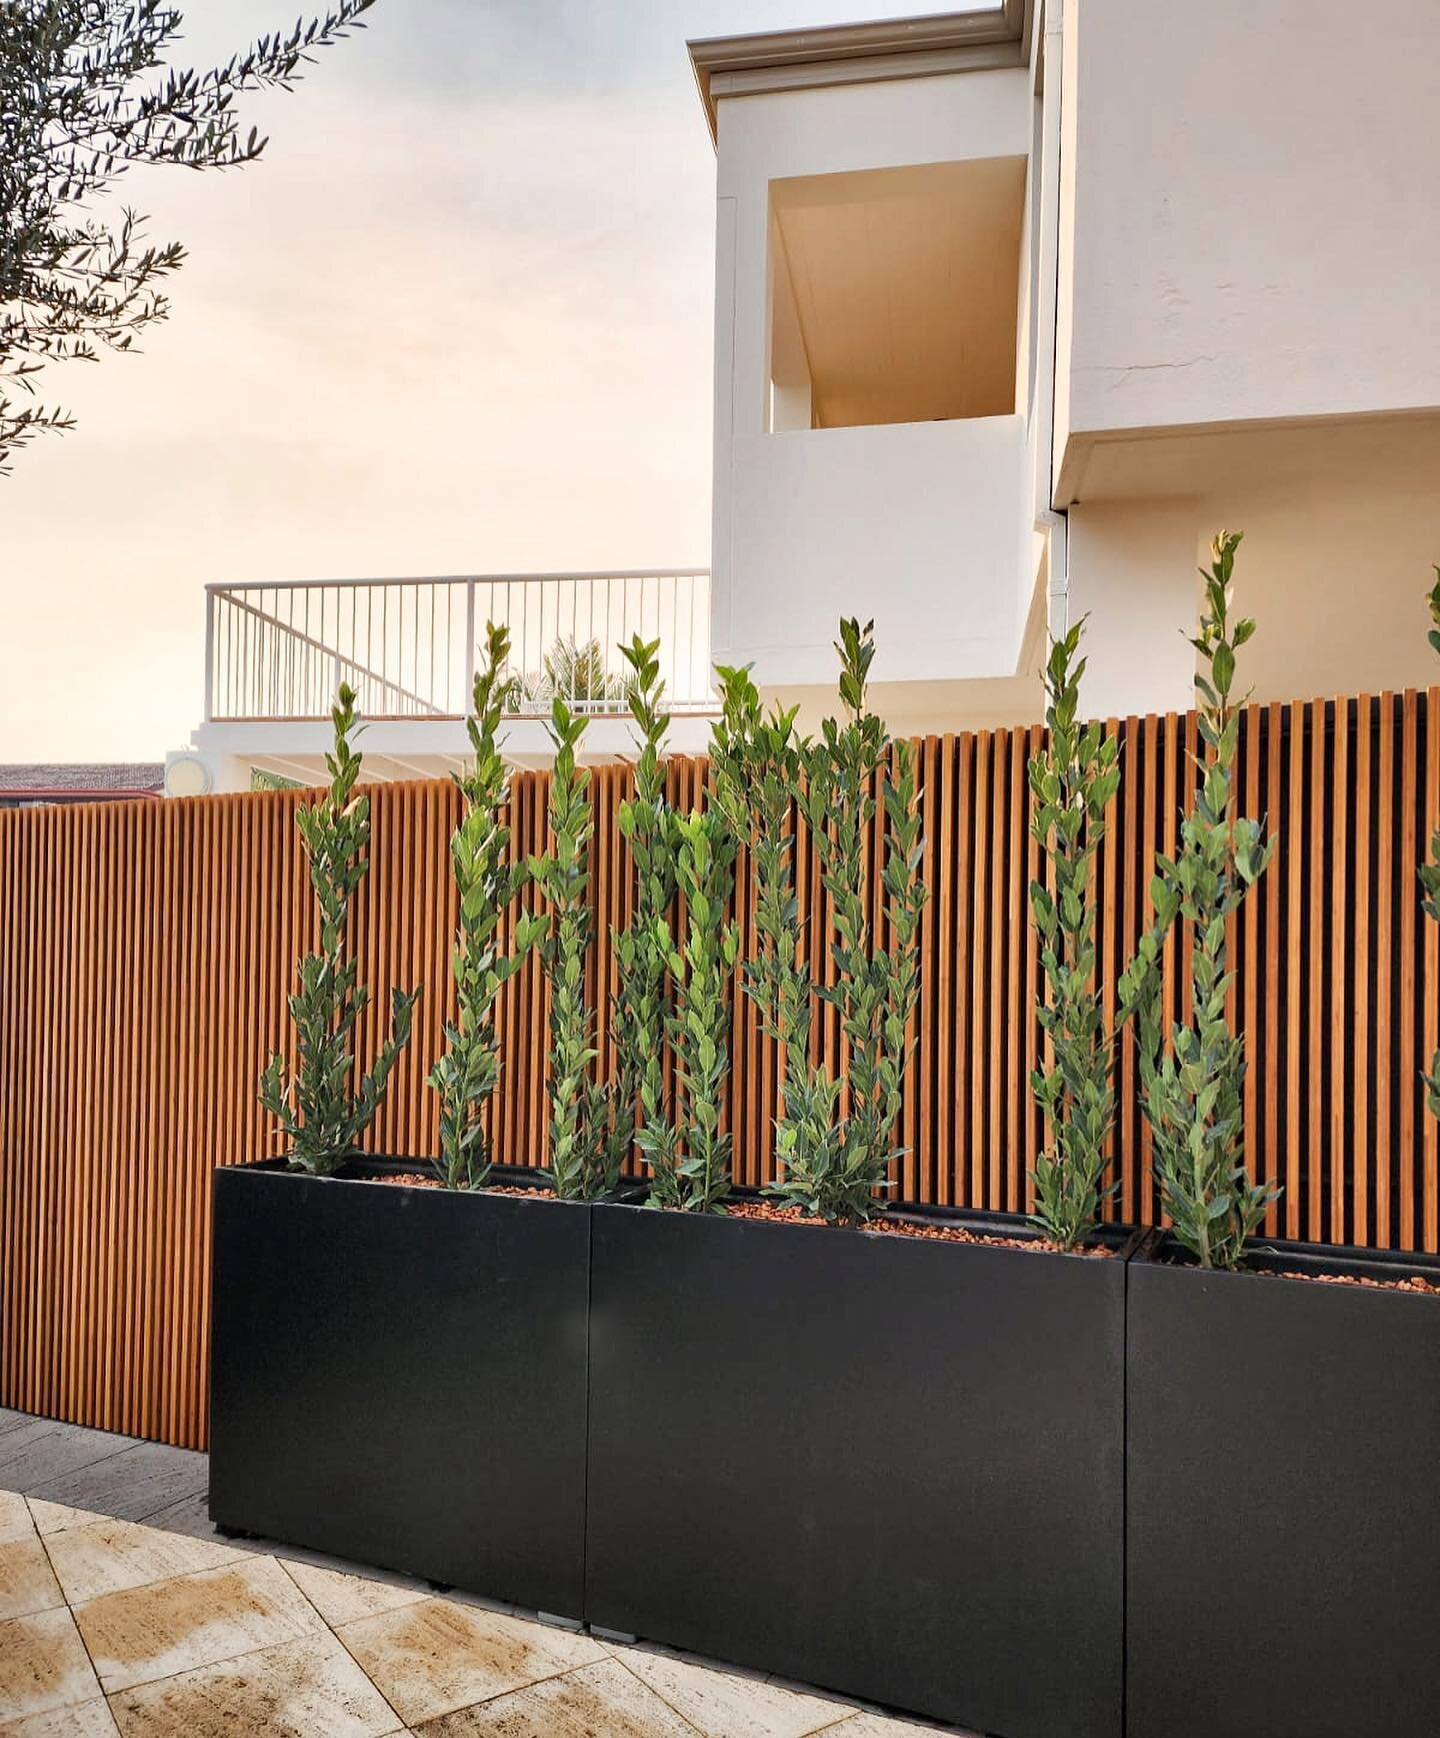 Bamboo fence screening will take your landscaping to the next level 😮&zwj;💨🔥

Pretreated with 3 coats of @wocaaustralia premium protective outdoor timber oil, our screens are ready to take on the weather.

We have certified installers to get your 